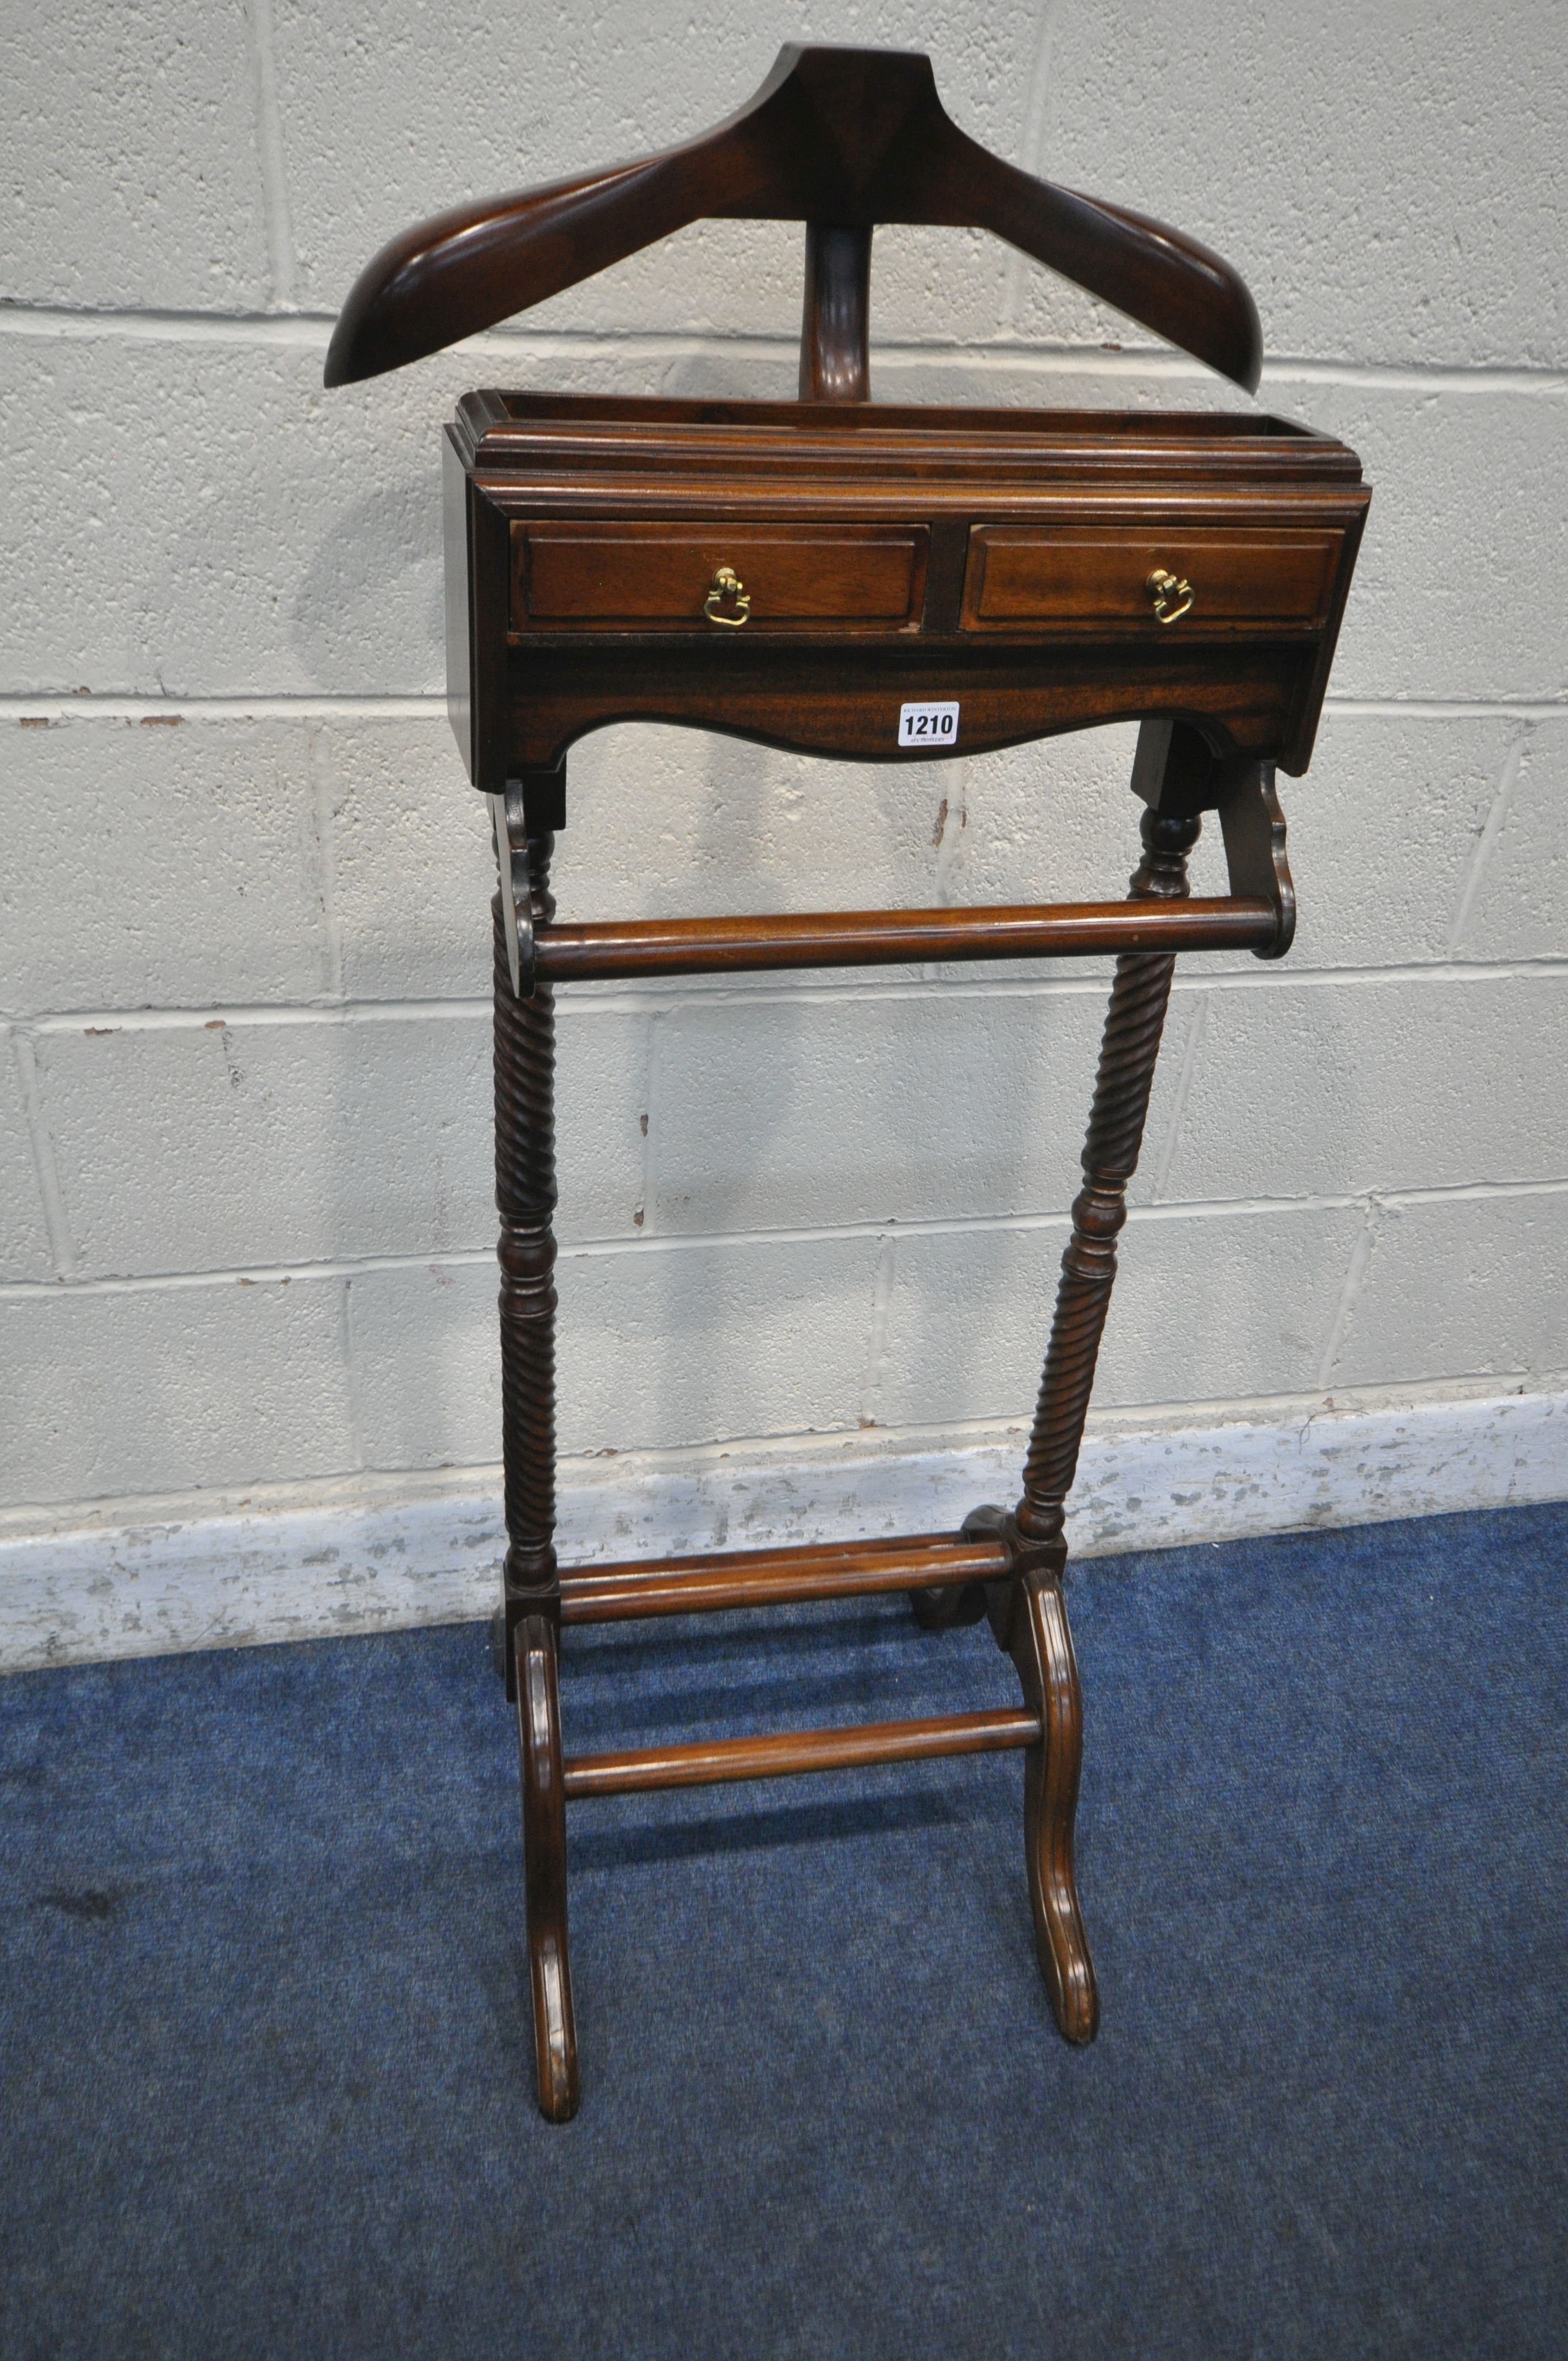 A 20TH CENTURY MAHOGANY GENTLEMAN'S VALET STAND, with jacket holder cuff link tray and two